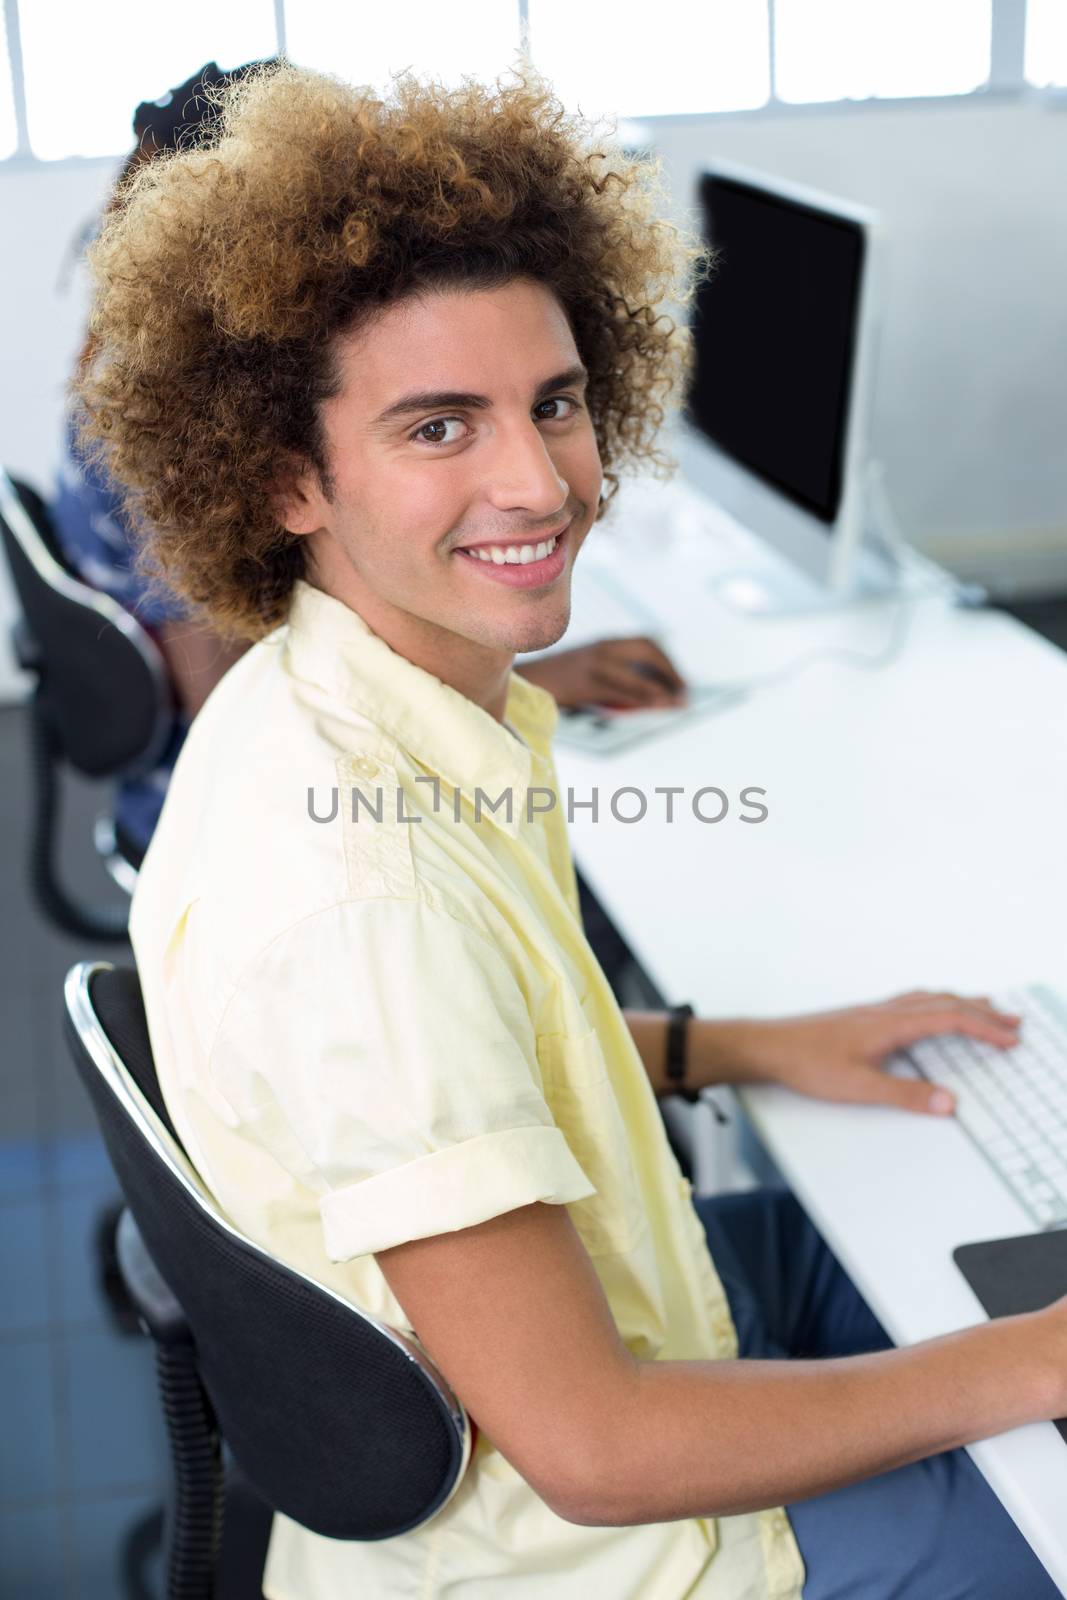 Male student smiling at camera in computer class